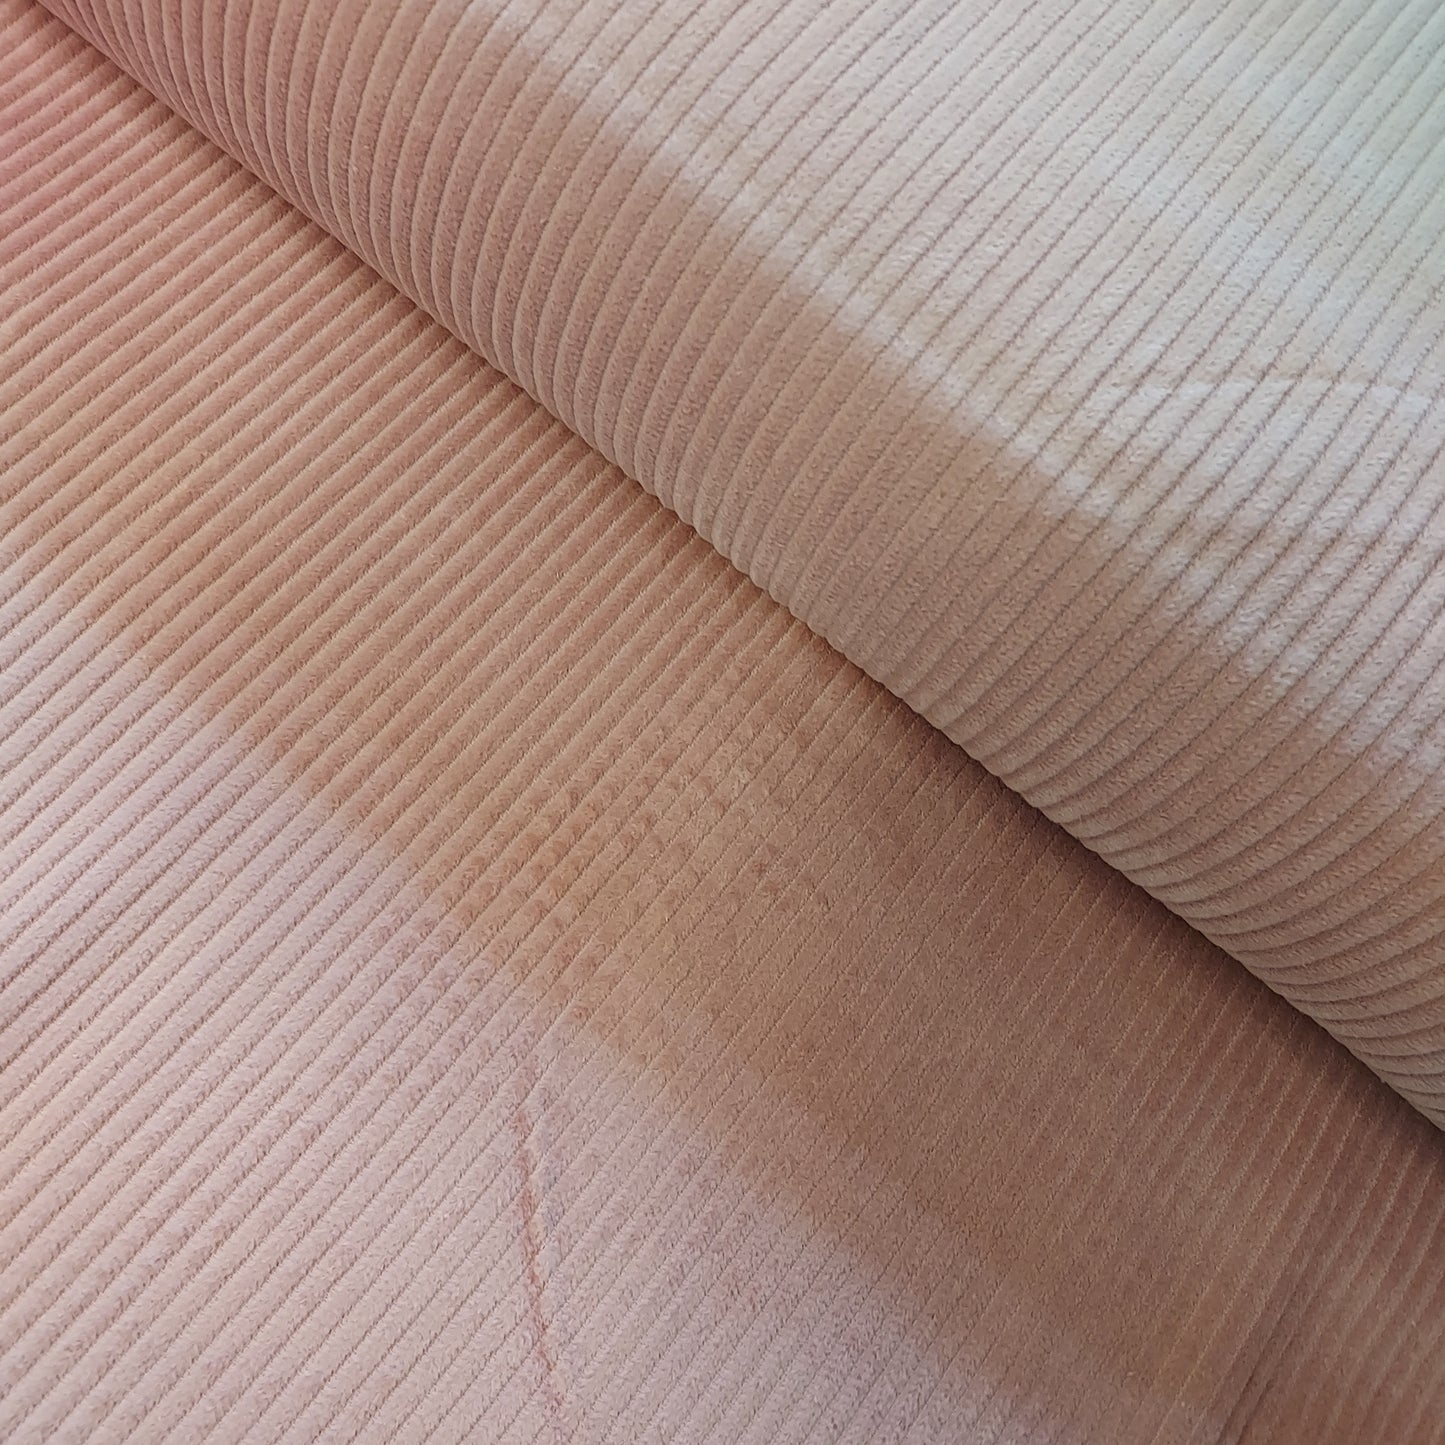 4.5 Wale Washed Corduroy Cotton Fabric - Various Colours